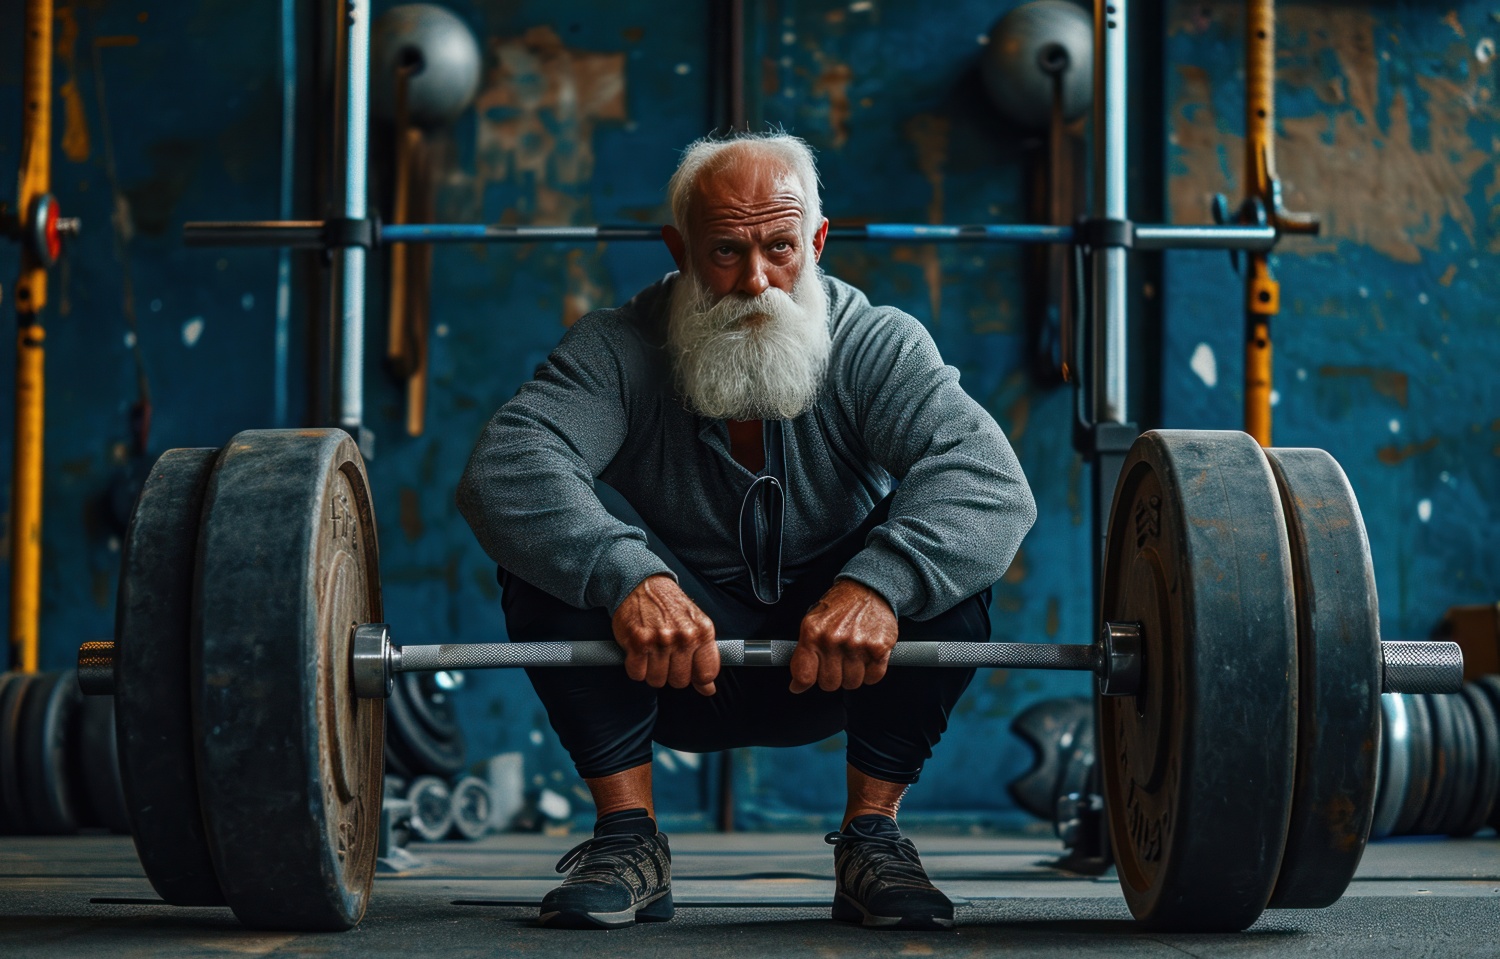 Does Weight Training Offer Mental Health Benefits to Older People?